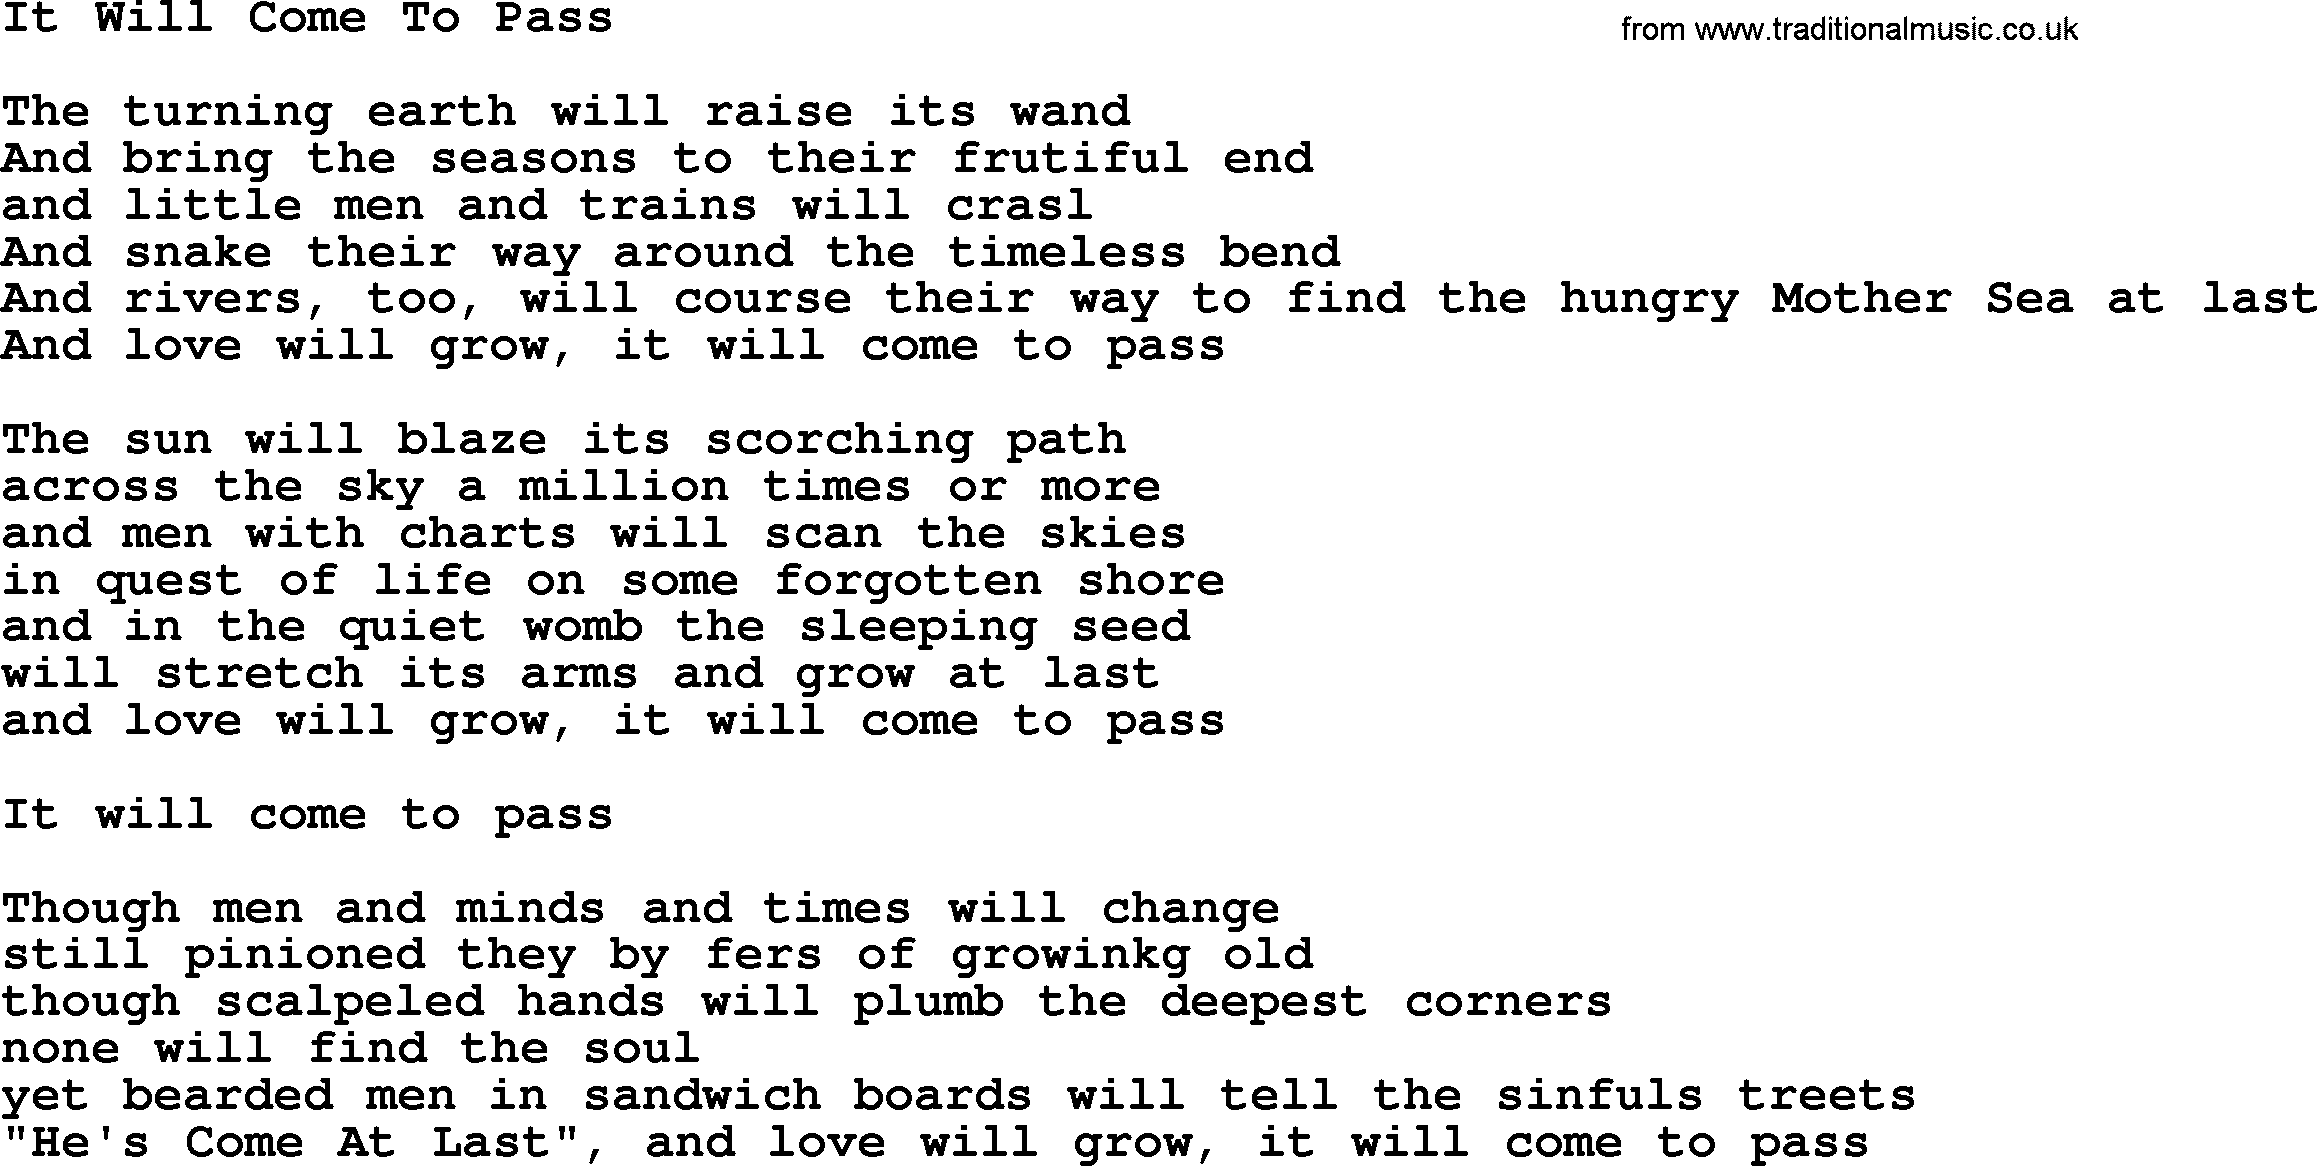 Willie Nelson song: It Will Come To Pass lyrics